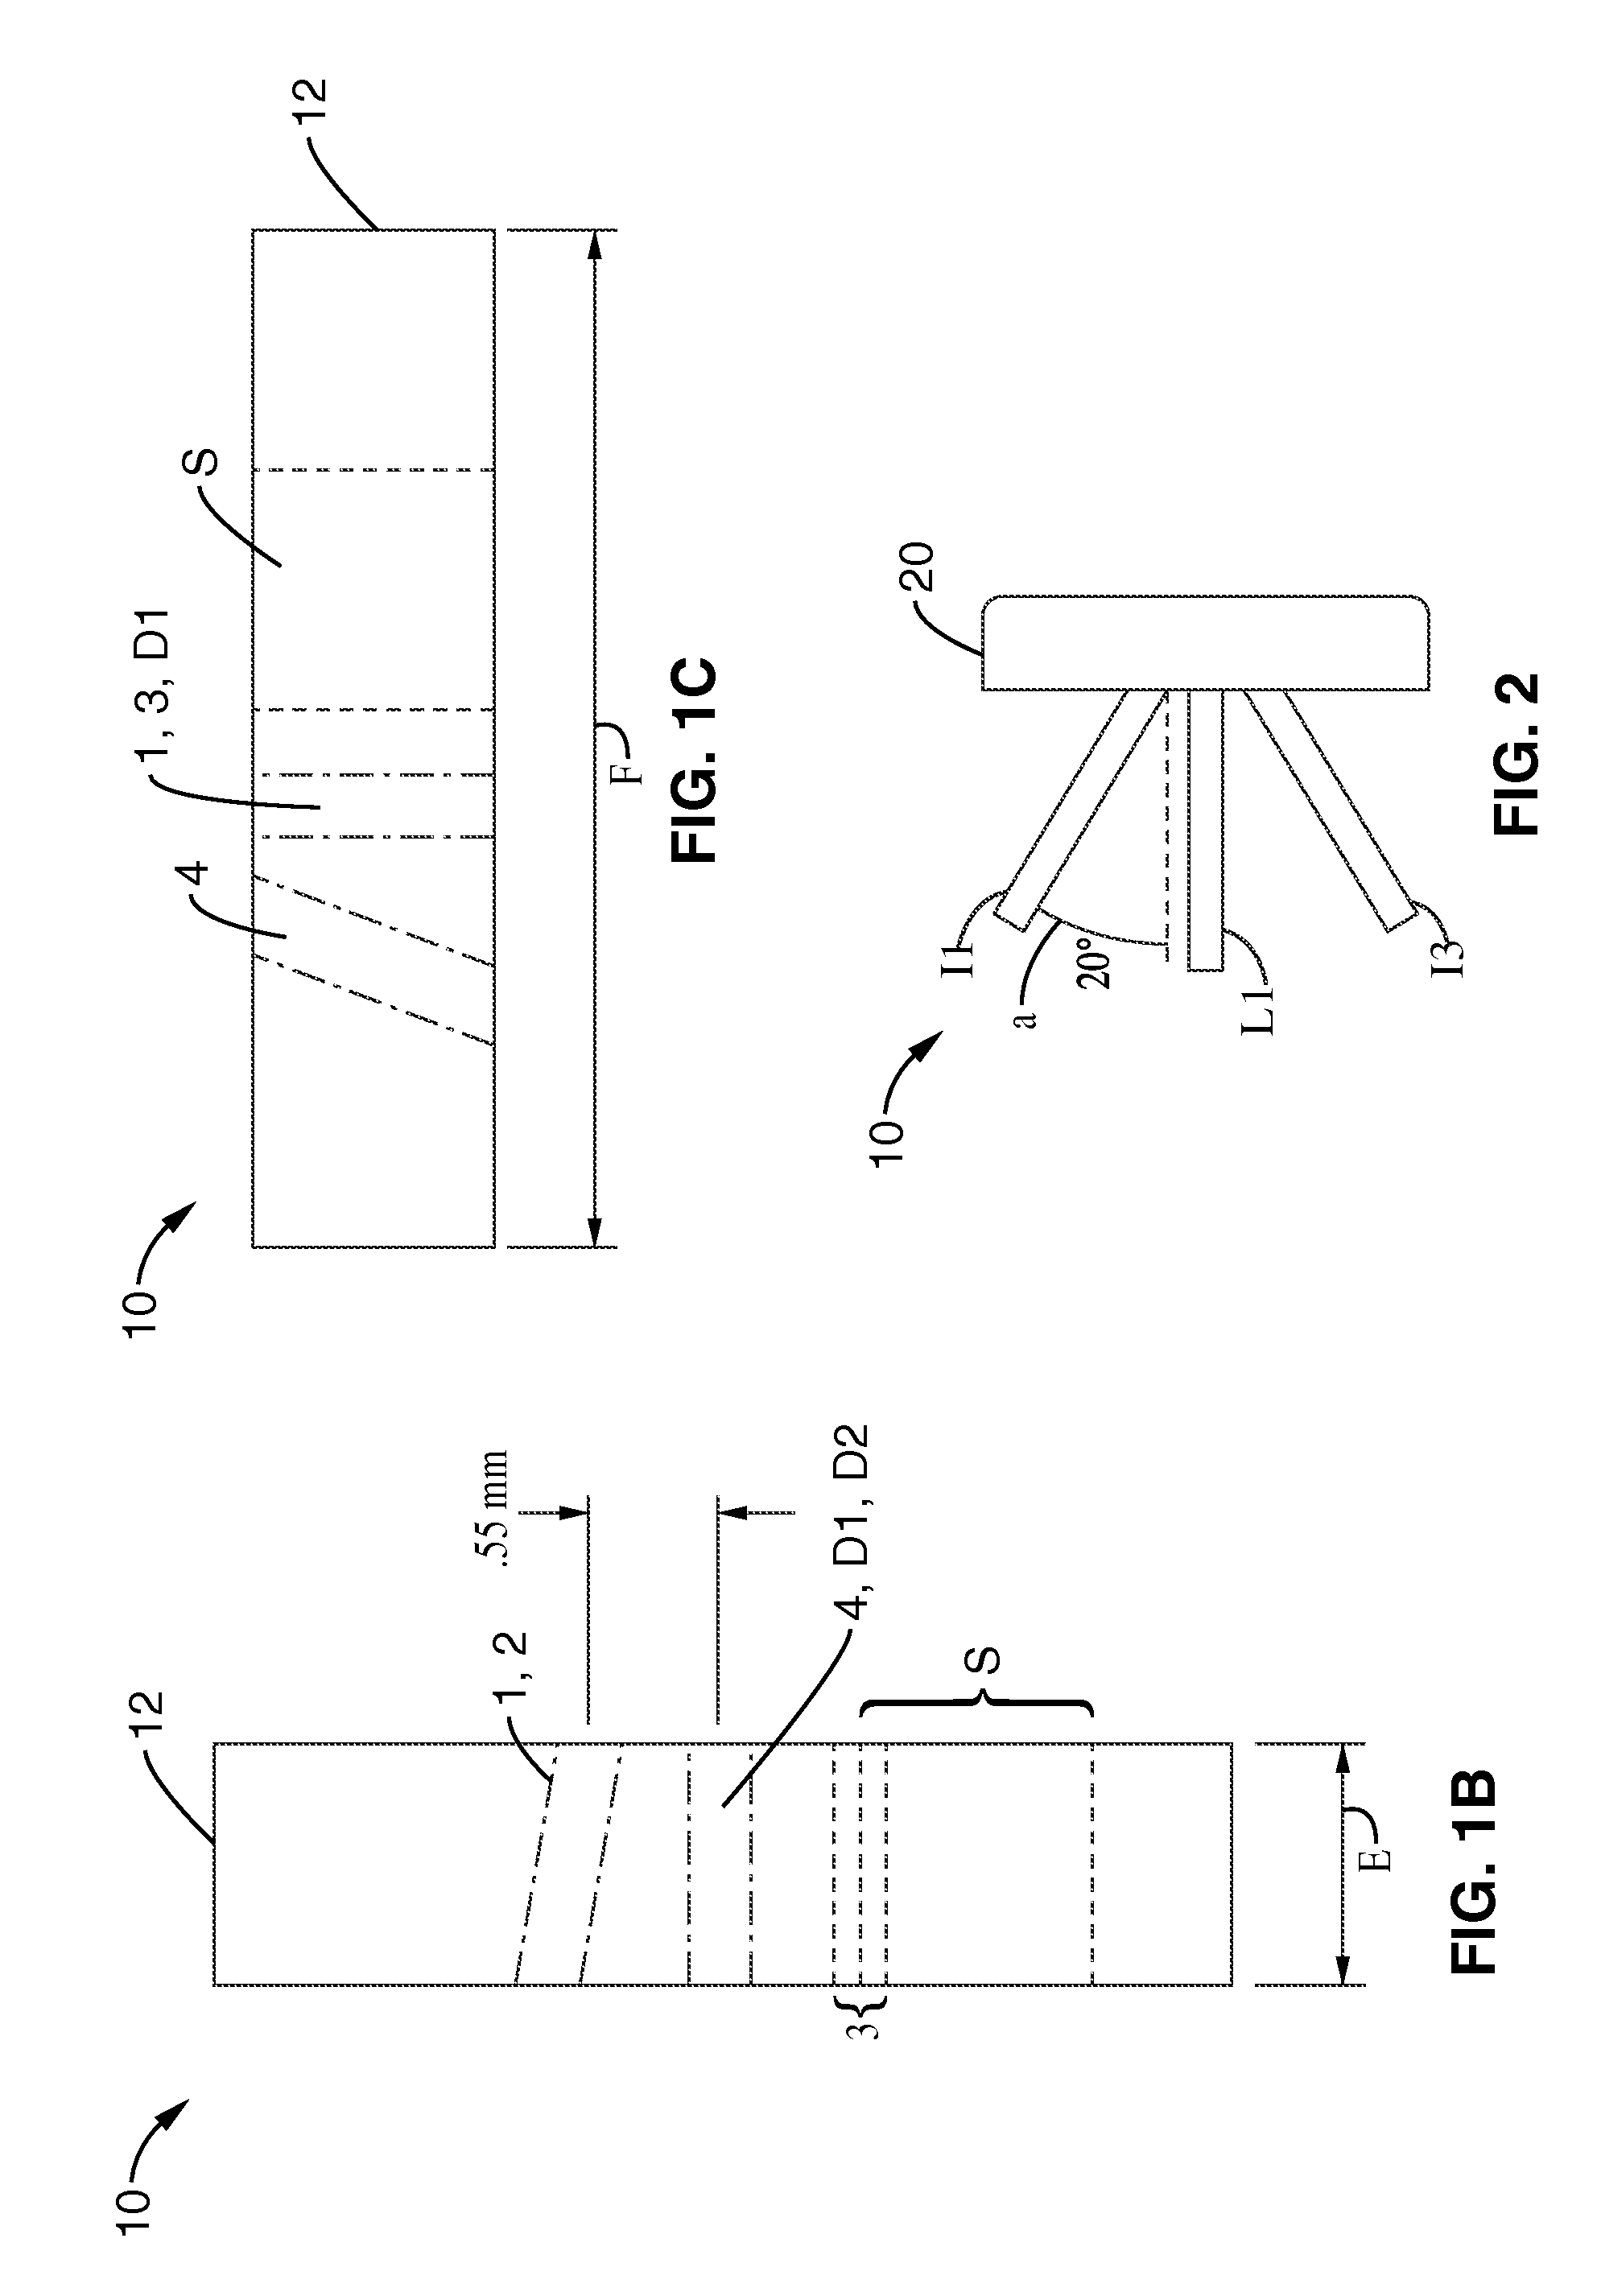 Medical device system and related methods for diagnosing abnormal medical conditions based on in-vivo optical properties of tissue